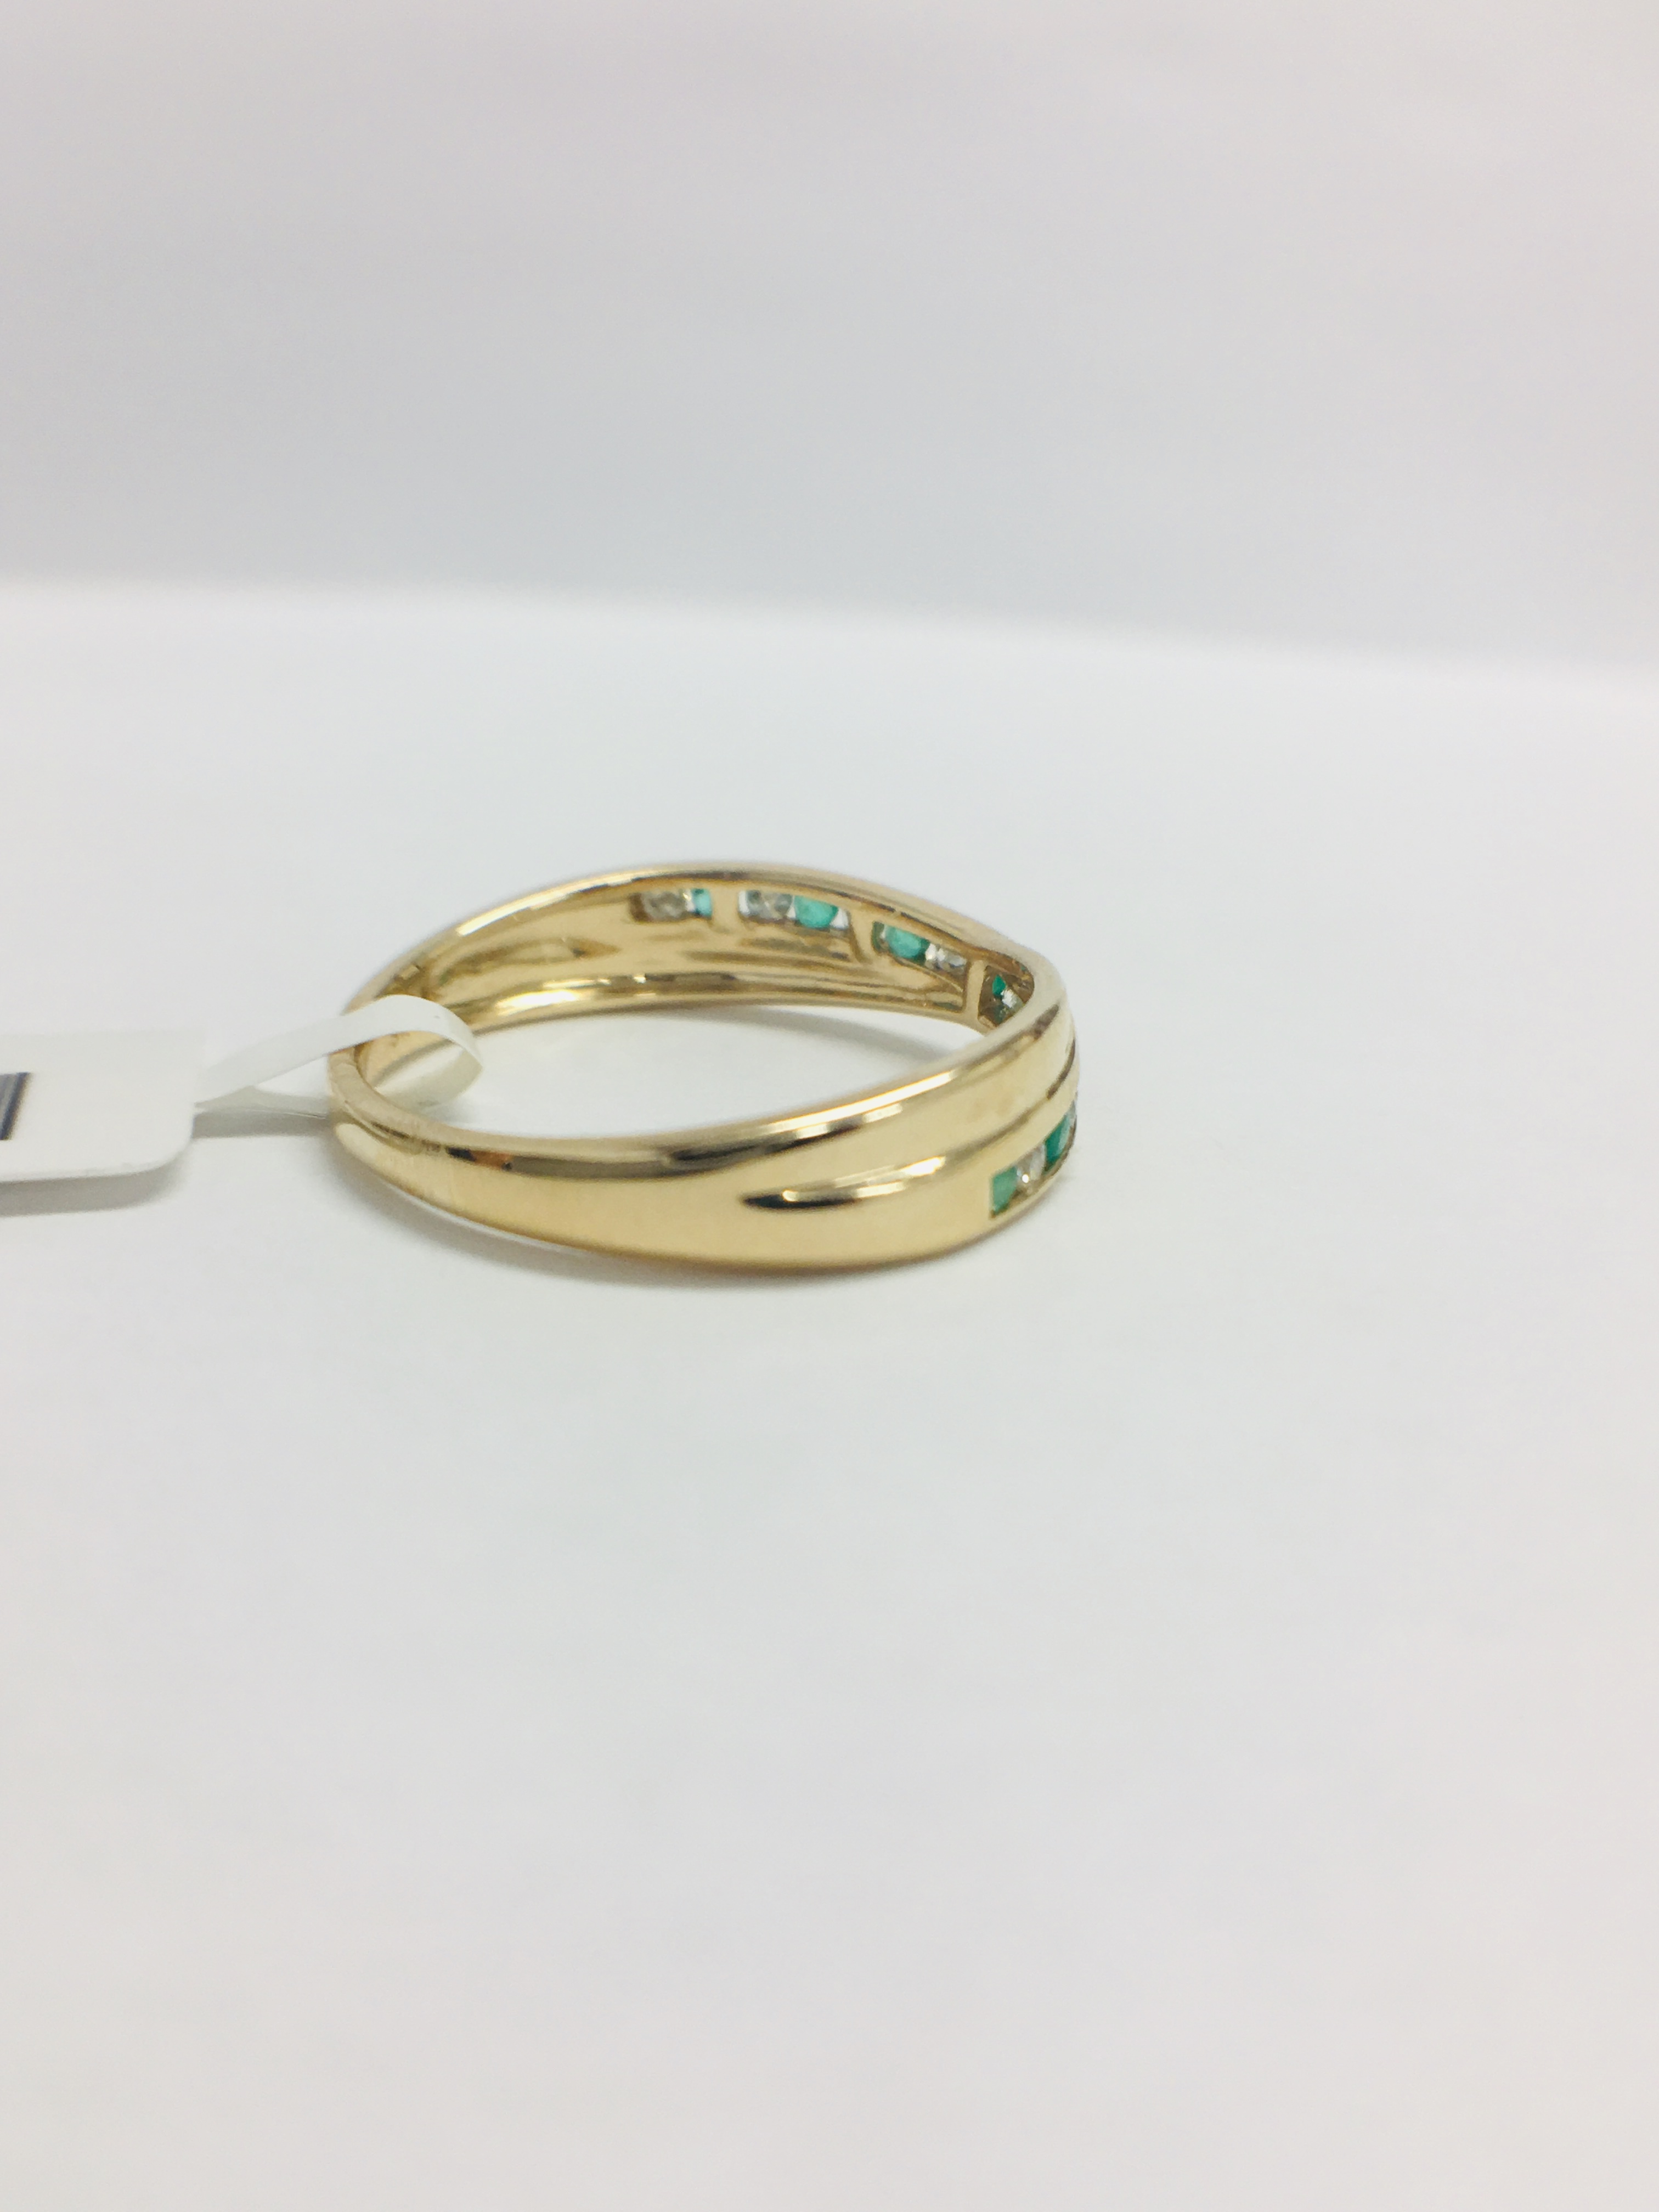 9Ct Yellow Gold Emerald Diamond Crossover Band Ring, - Image 7 of 11